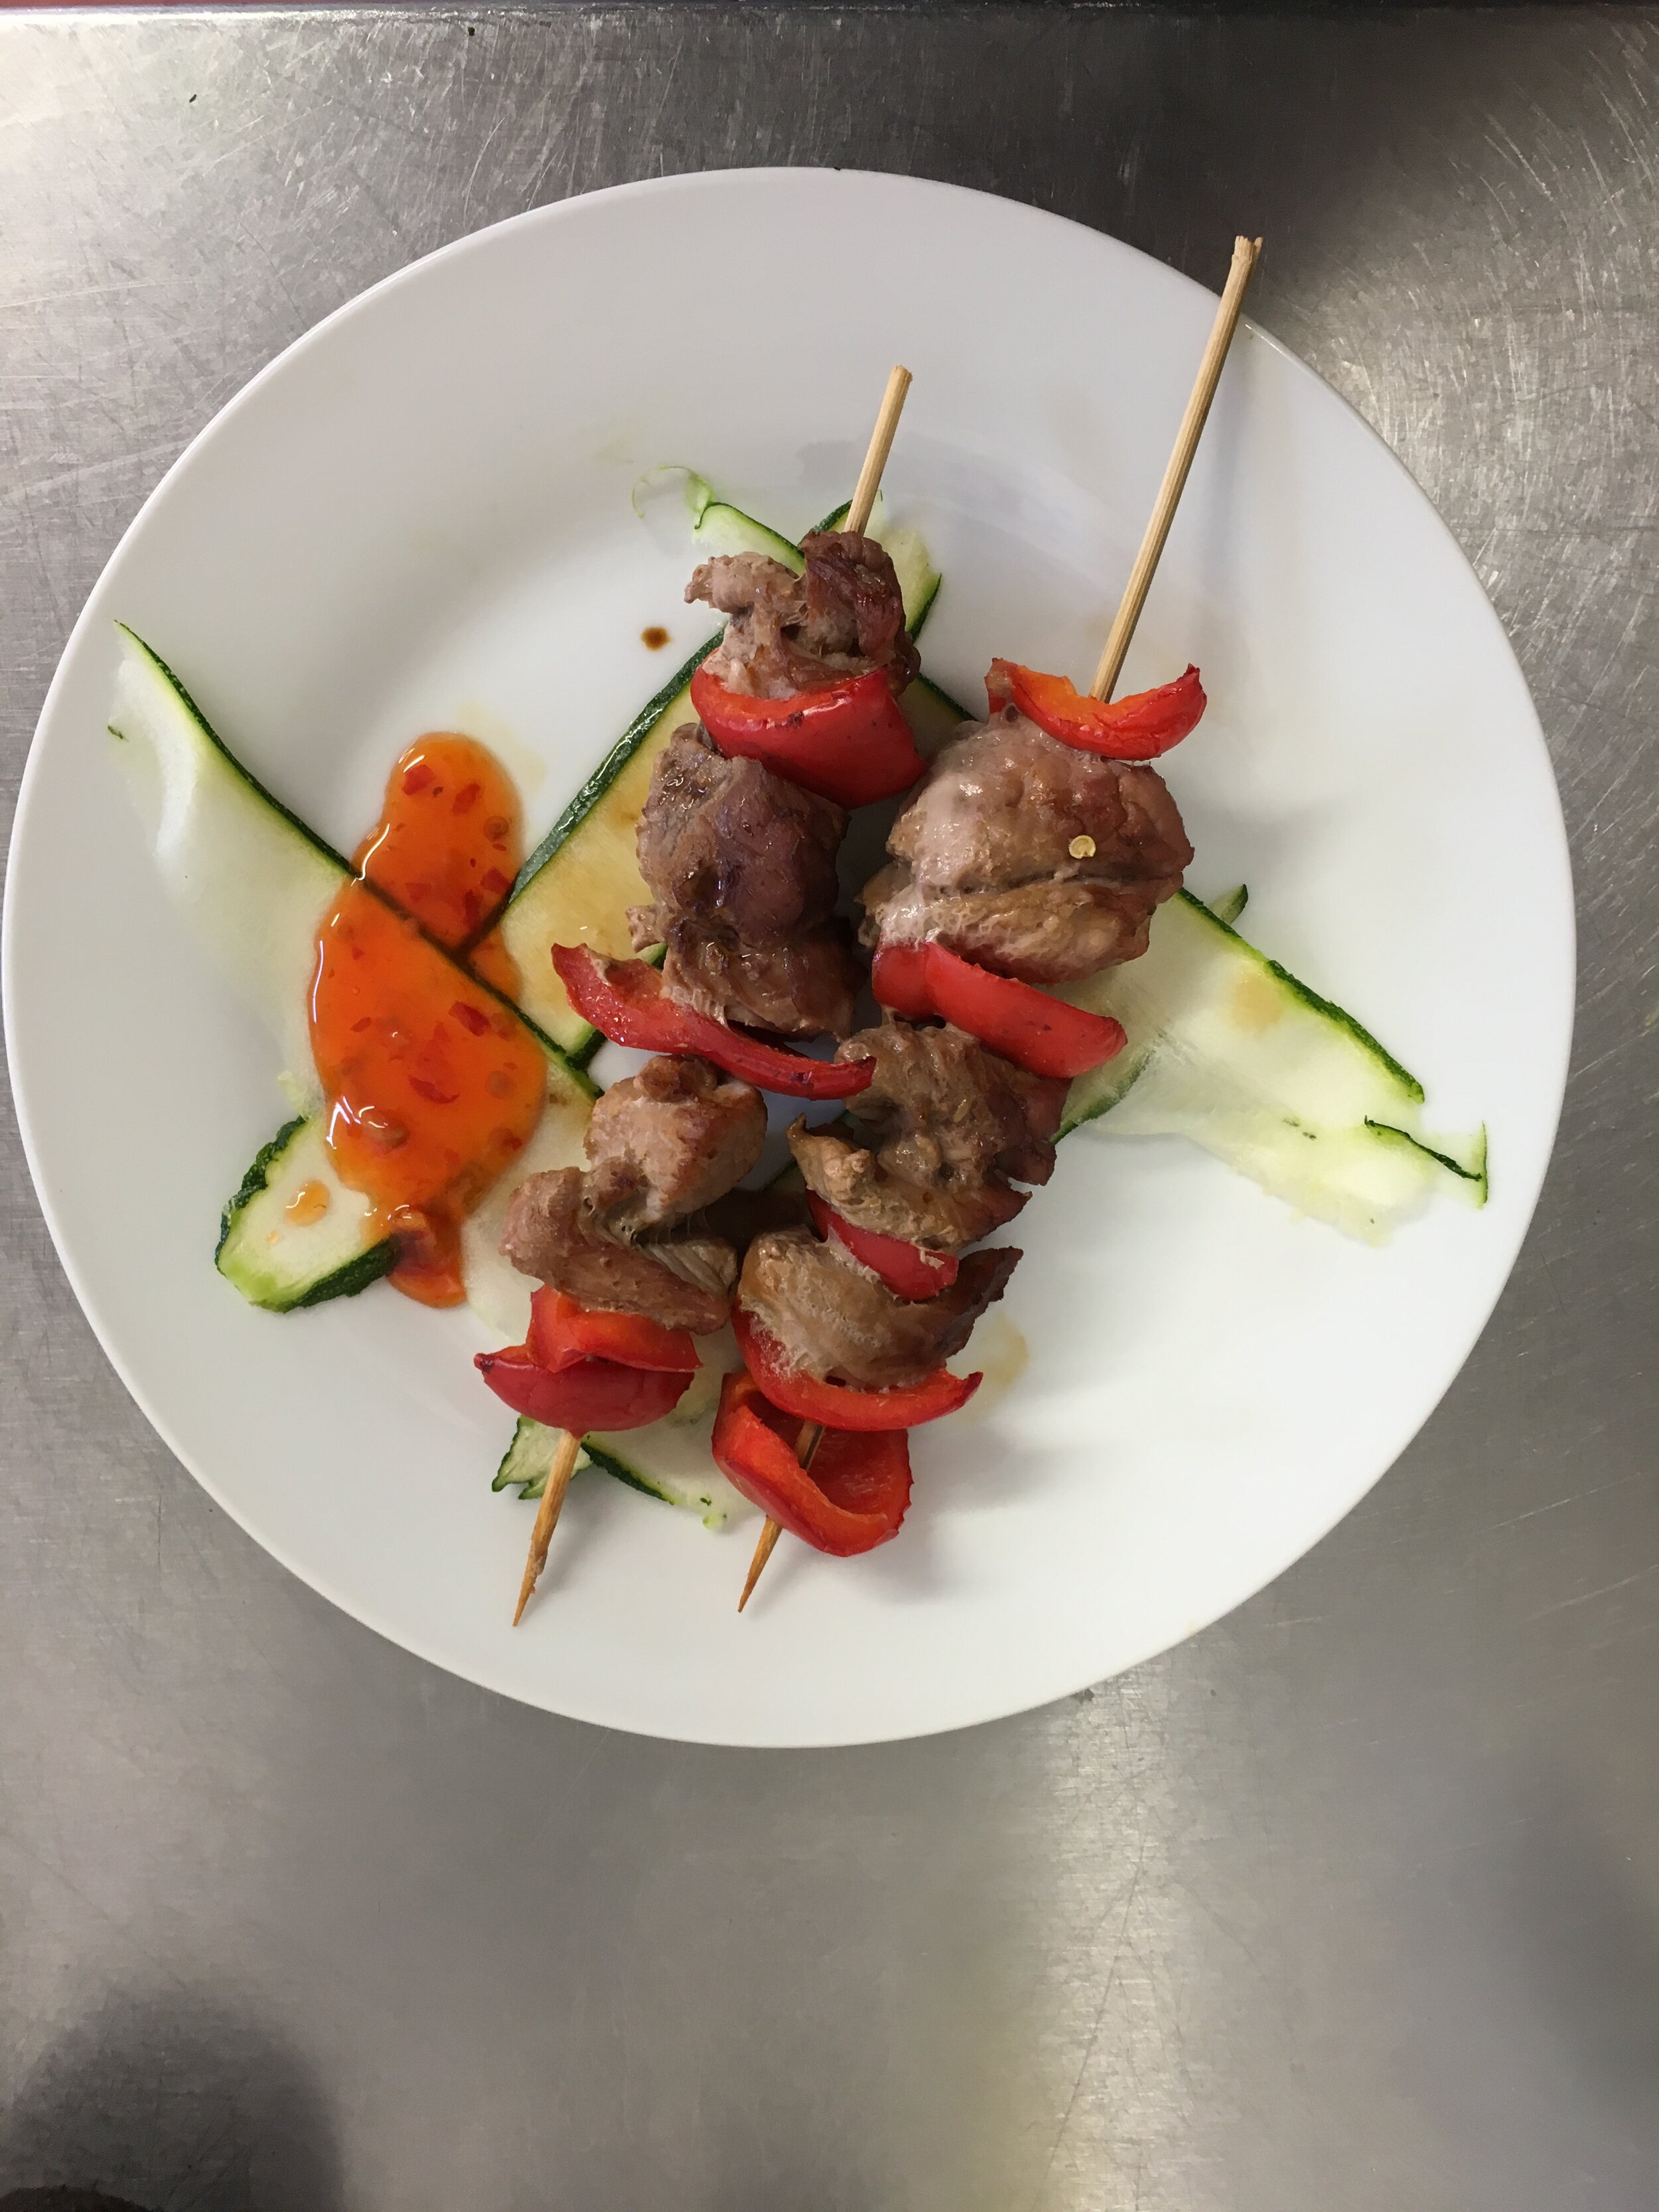 Venison and Lamb Skewer